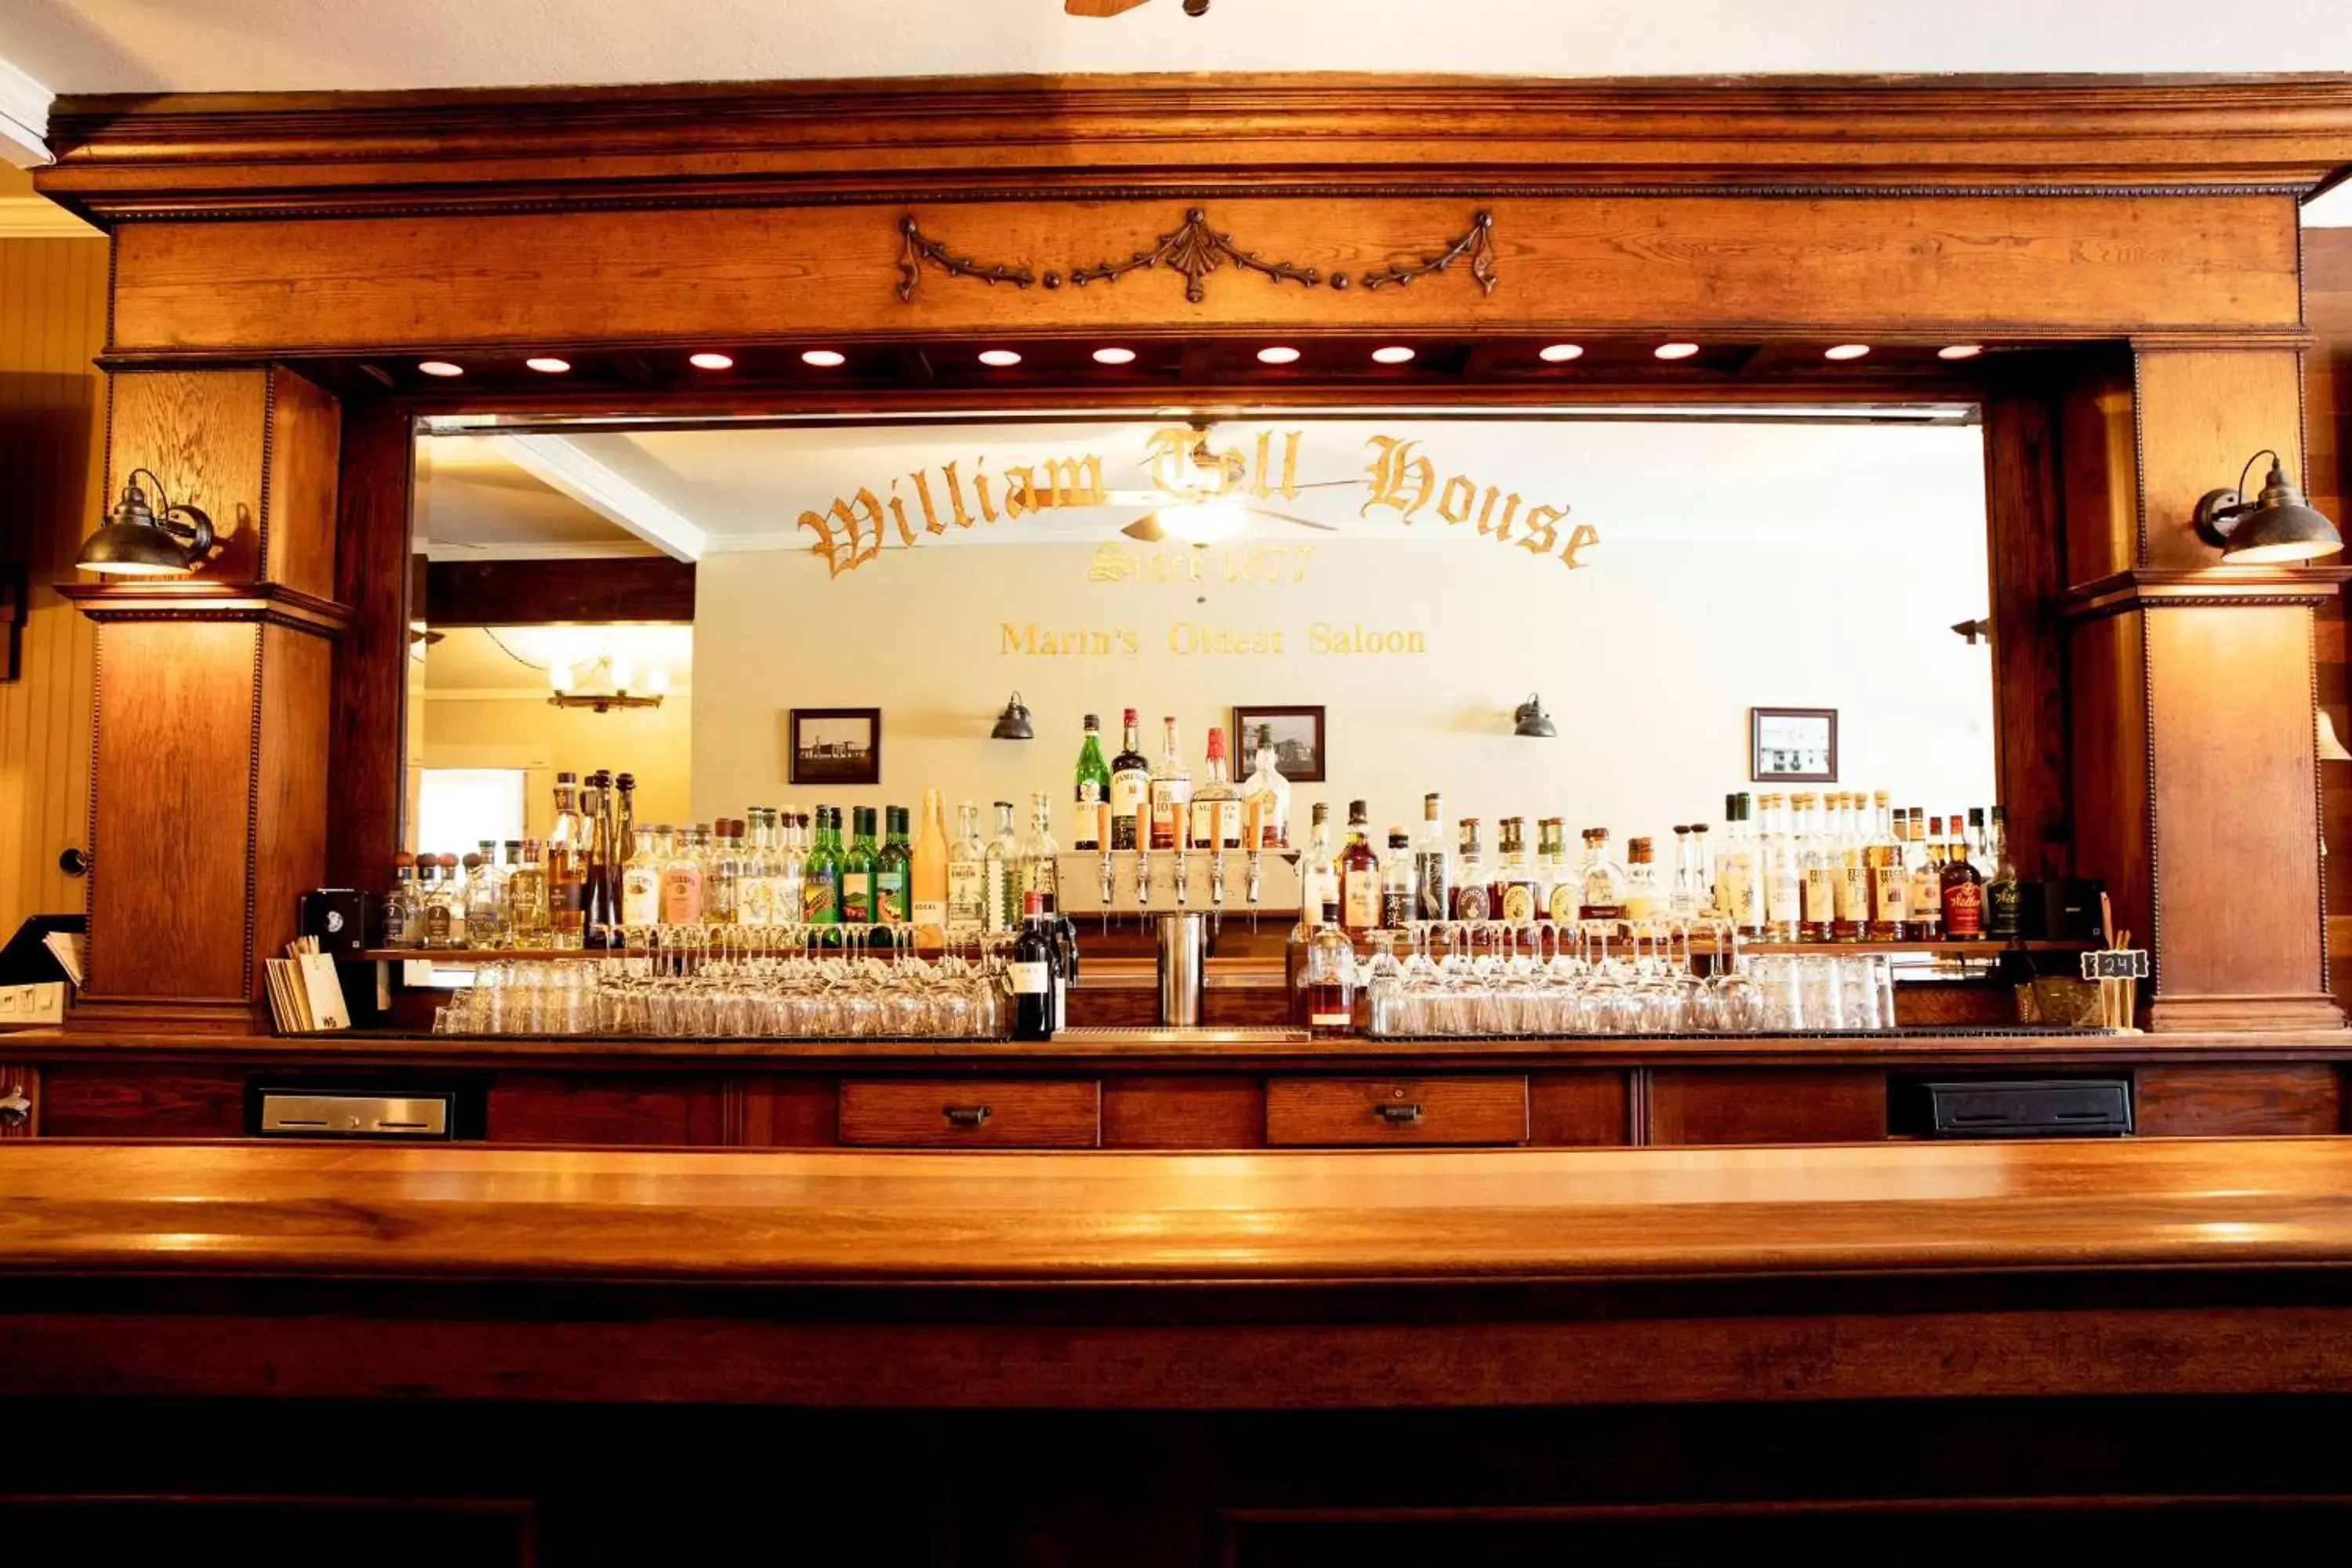 Lounge/Bar in William Tell House